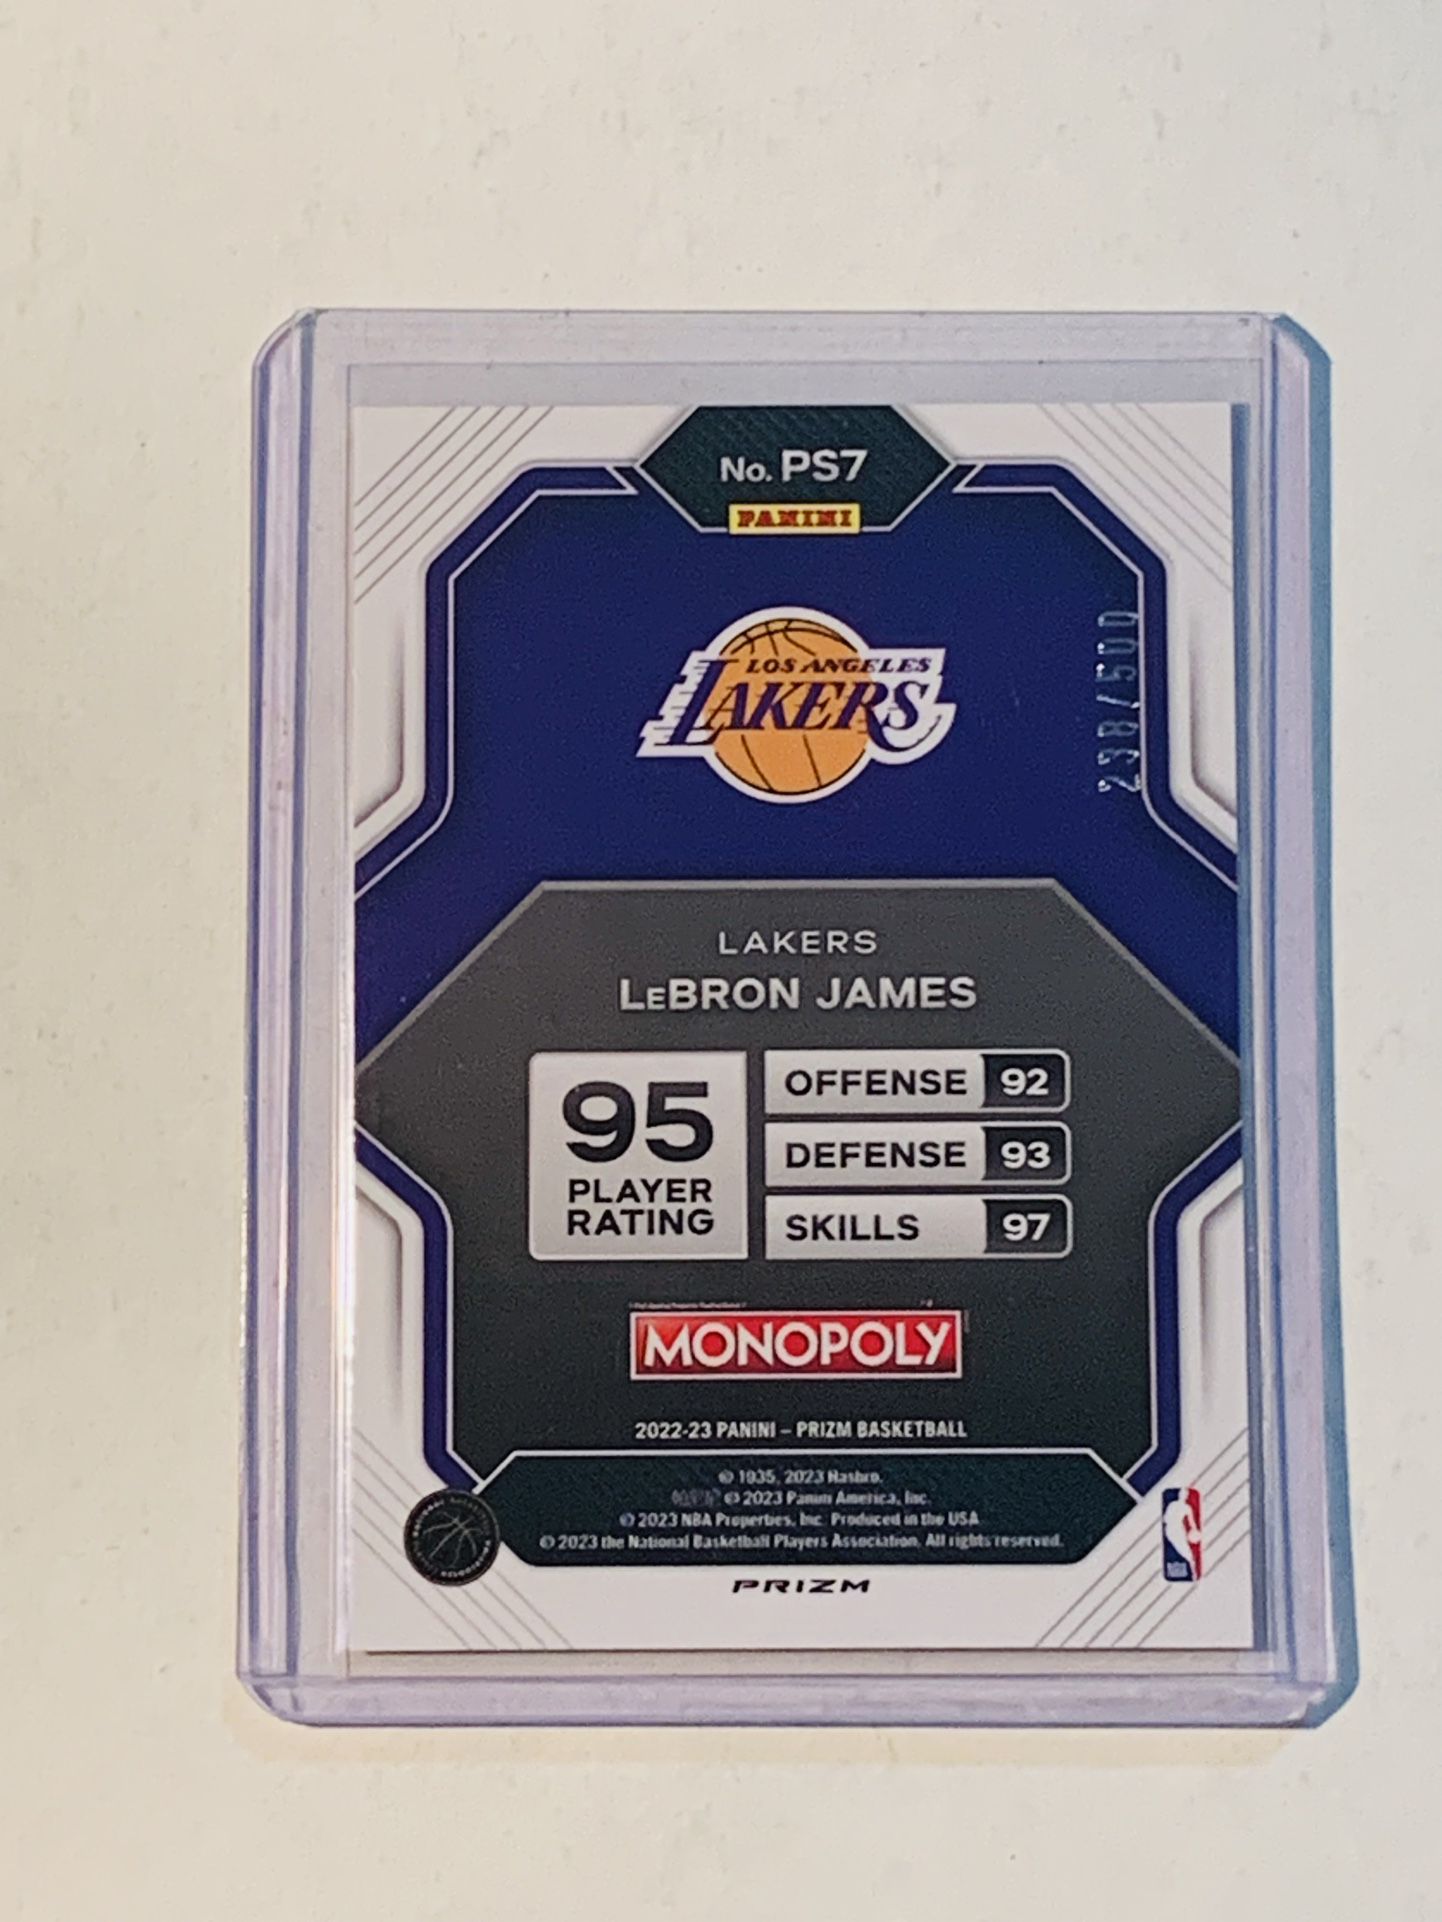 LeBron James NBA Gold Monopoly Card for Sale in San Antonio, TX - OfferUp